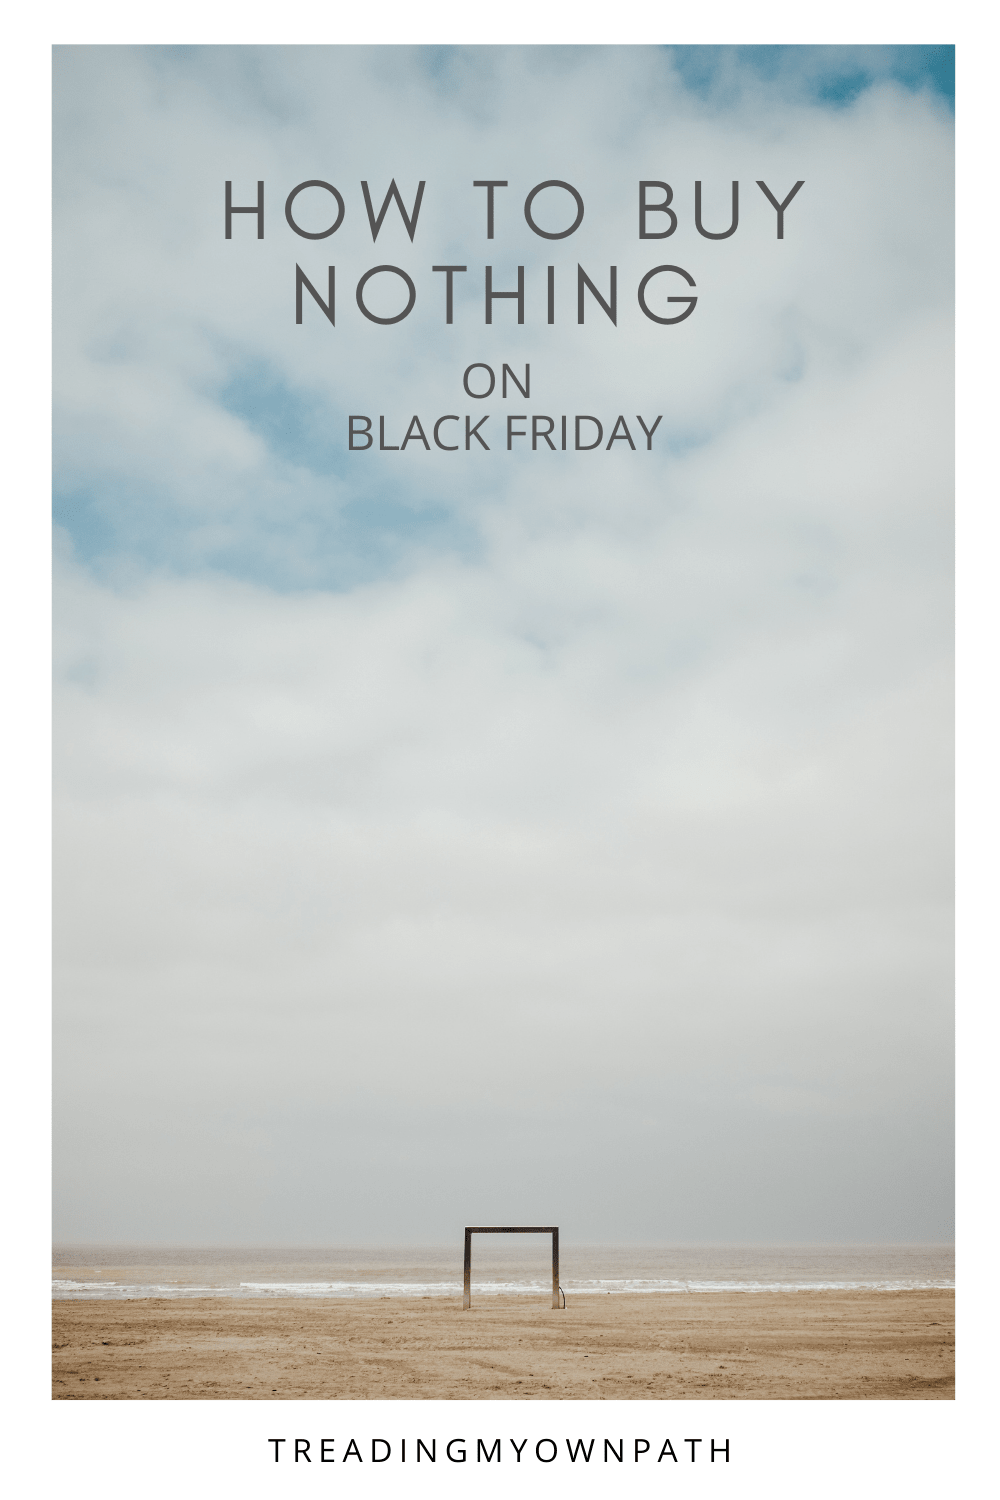 How to buy nothing on Black Friday